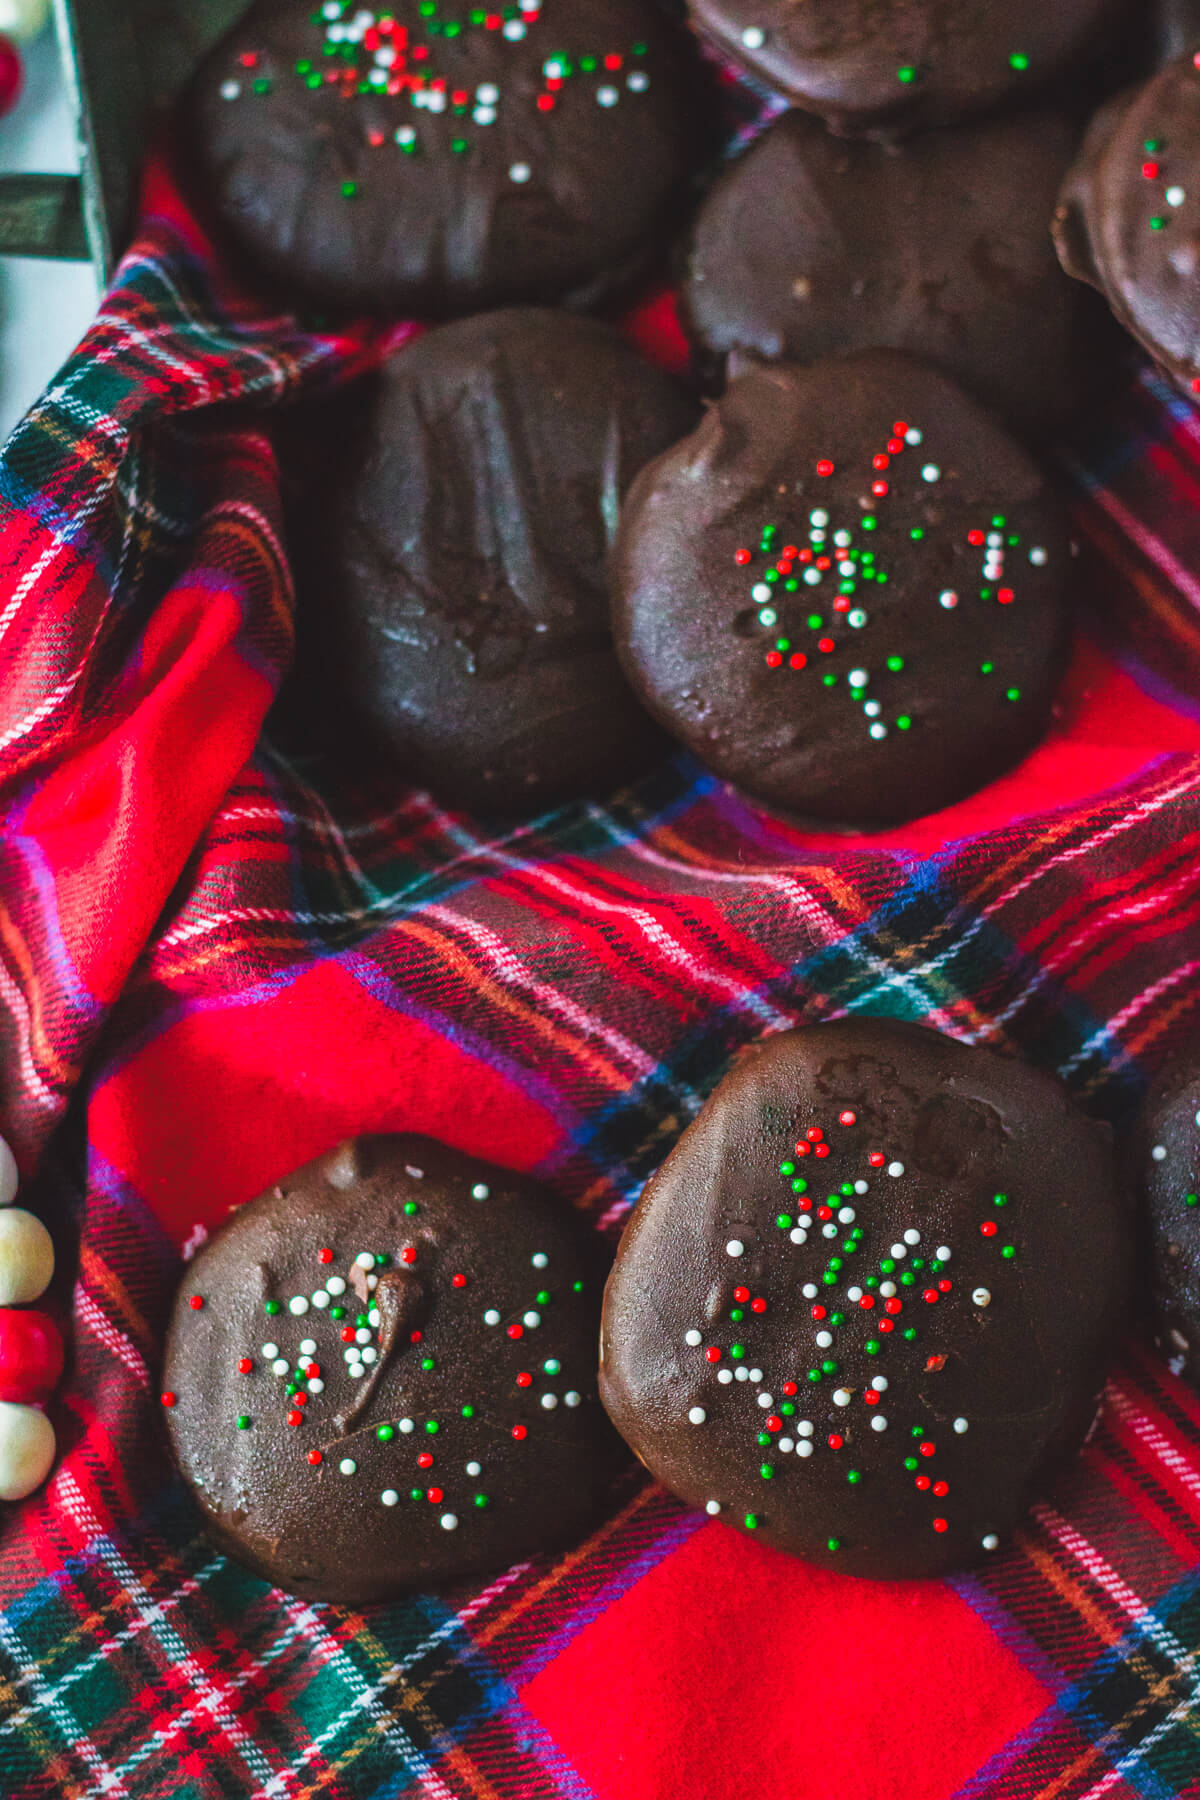 A group of dark chocolate coated peppermint patty candies on a plaid tablecloth.